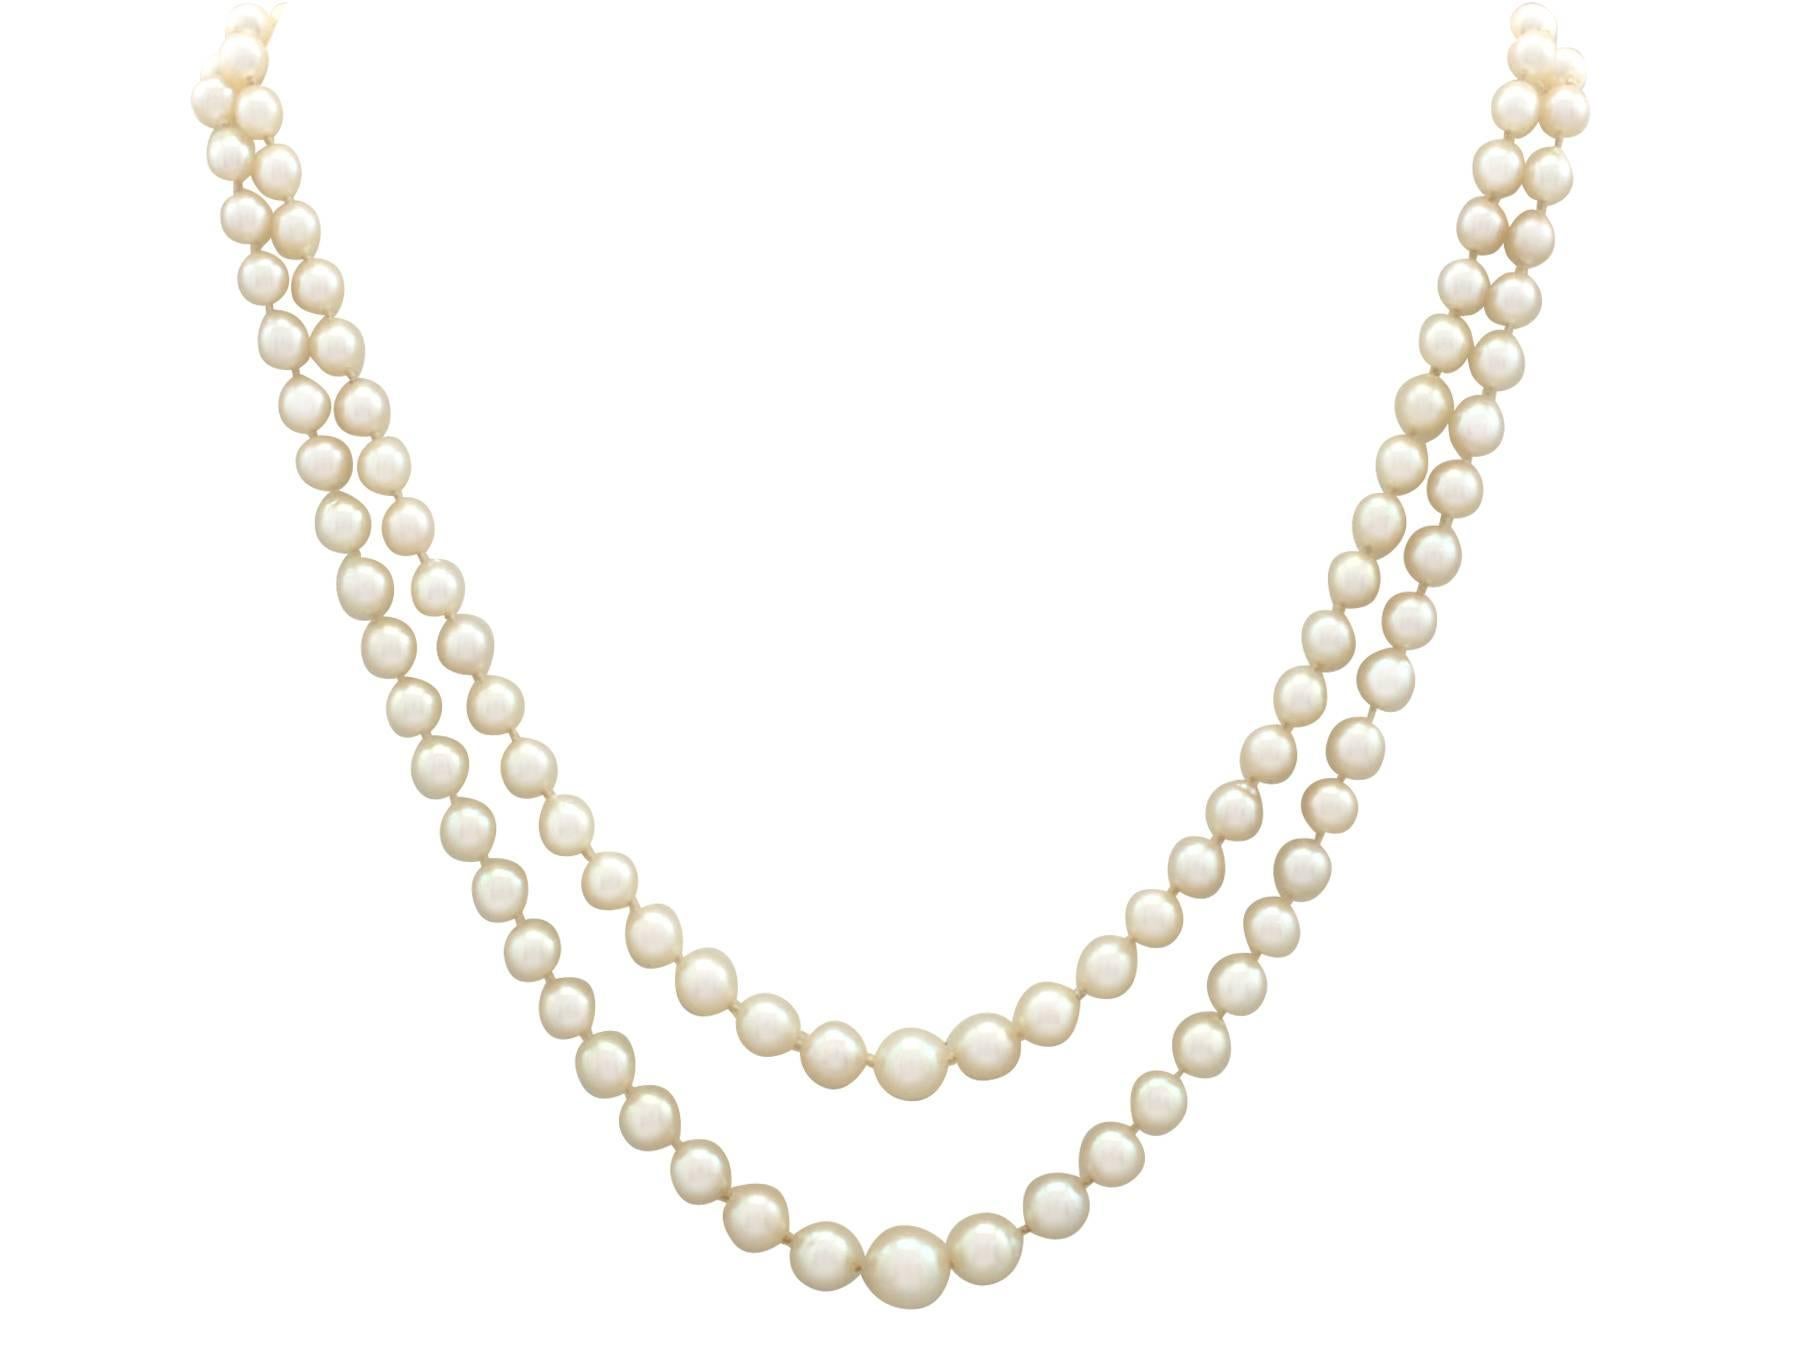 An impressive double strand pearl necklace with imitation stone, 0.43 carat diamond and 18 karat white gold, platinum set clasp; part of our diverse pear jewelry collections.

This fine and impressive vintage double strand pearl necklace has been